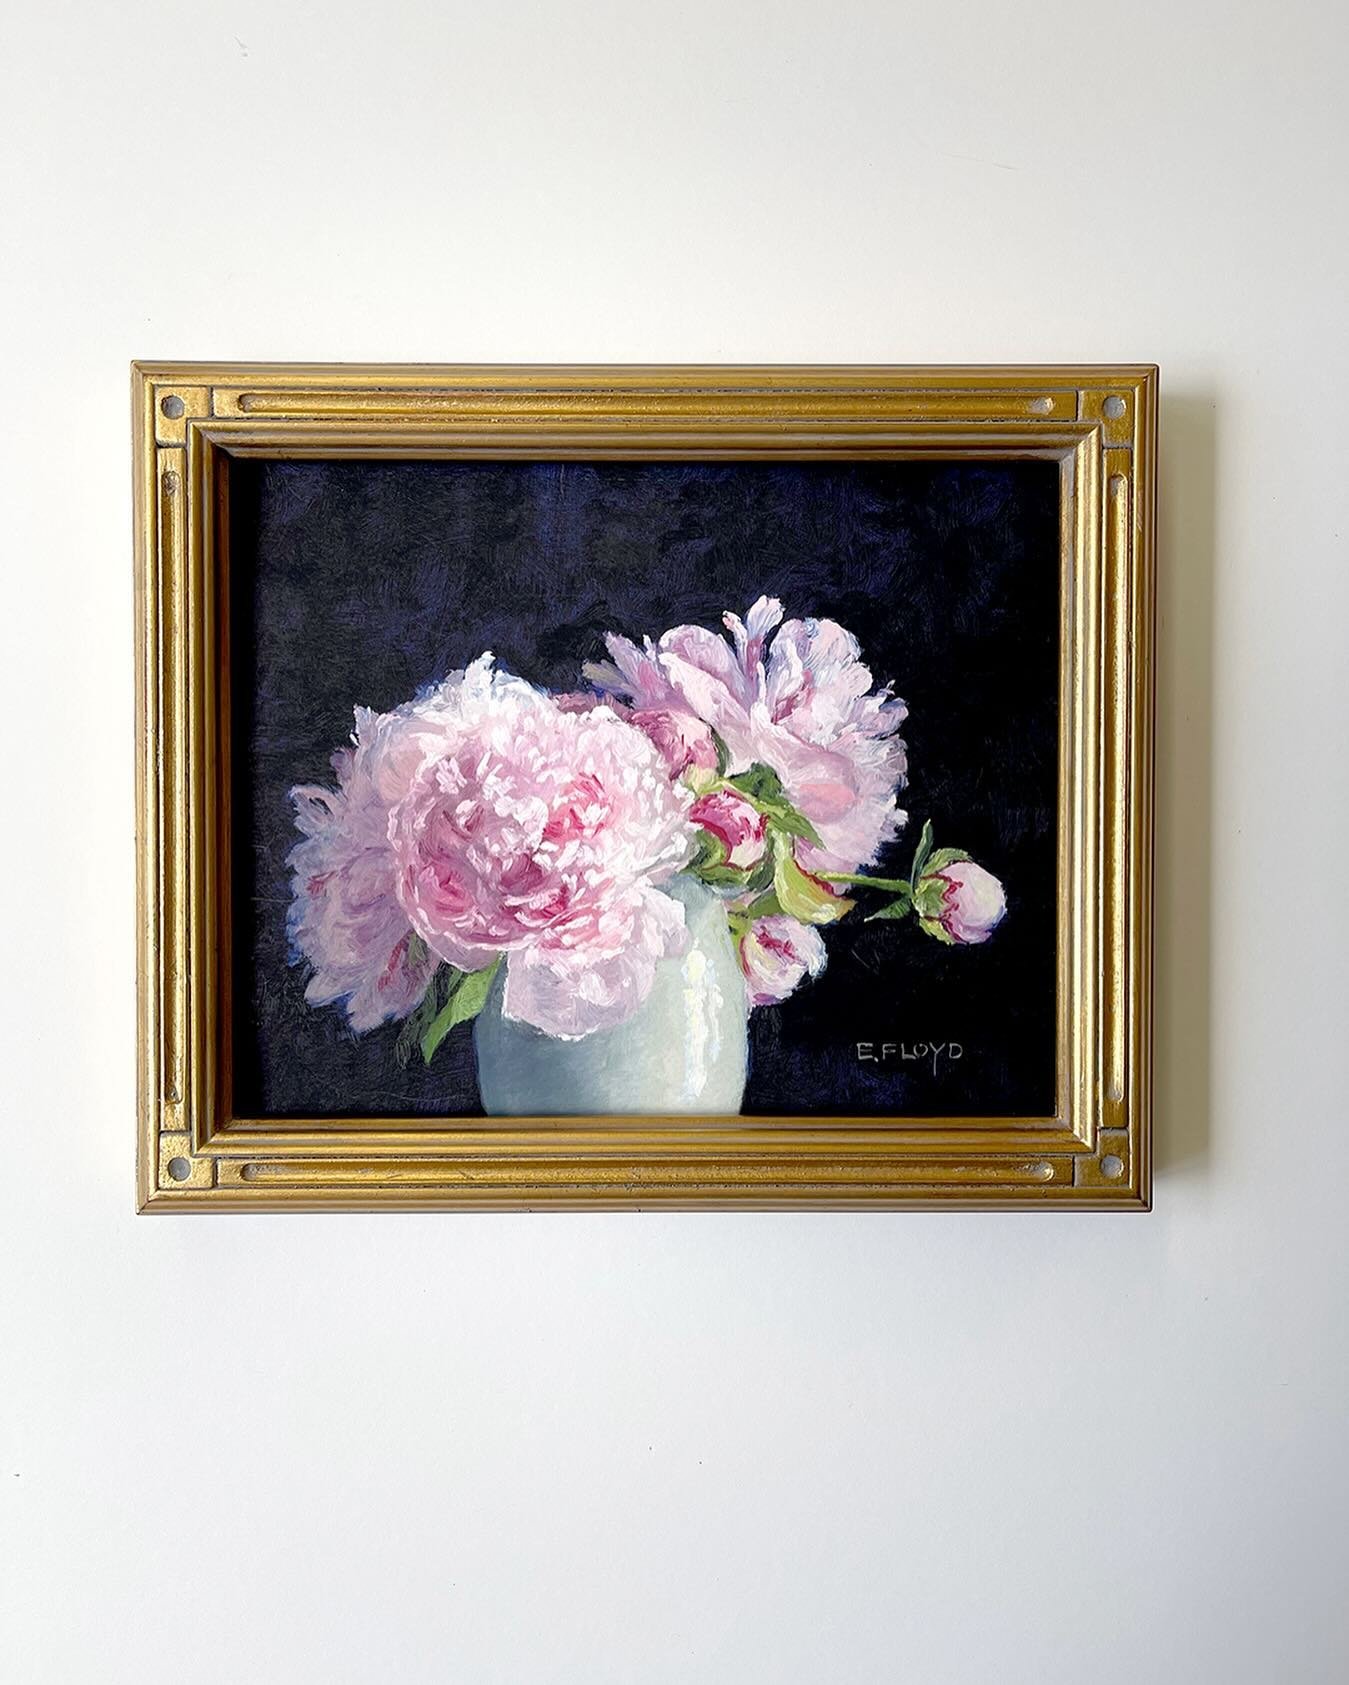 May&rsquo;s print! 🩷⁠ ⁠
⁠
Detail of &ldquo;Peonies on a Book&rdquo; is now available as a fine art print.⁠
⁠
8&rdquo;x10&rdquo; print on 285gsm watercolor paper. Unframed. ⁠
⁠
I love these peonies, how they just seem to jump of the surface.  If I we